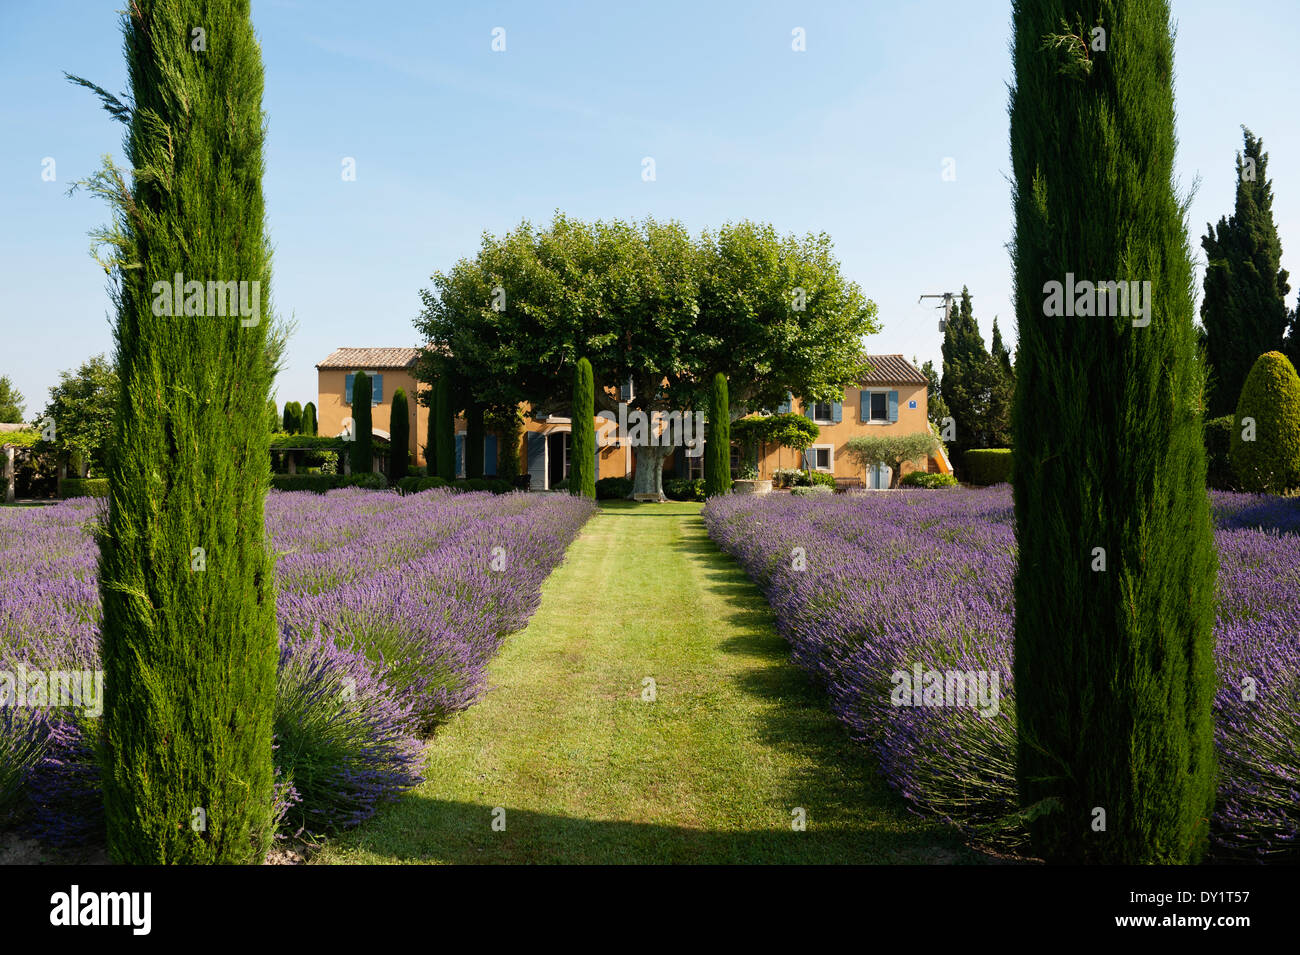 Grass path lined with lavender and cypress trees leading to a provencal farmhouse Stock Photo